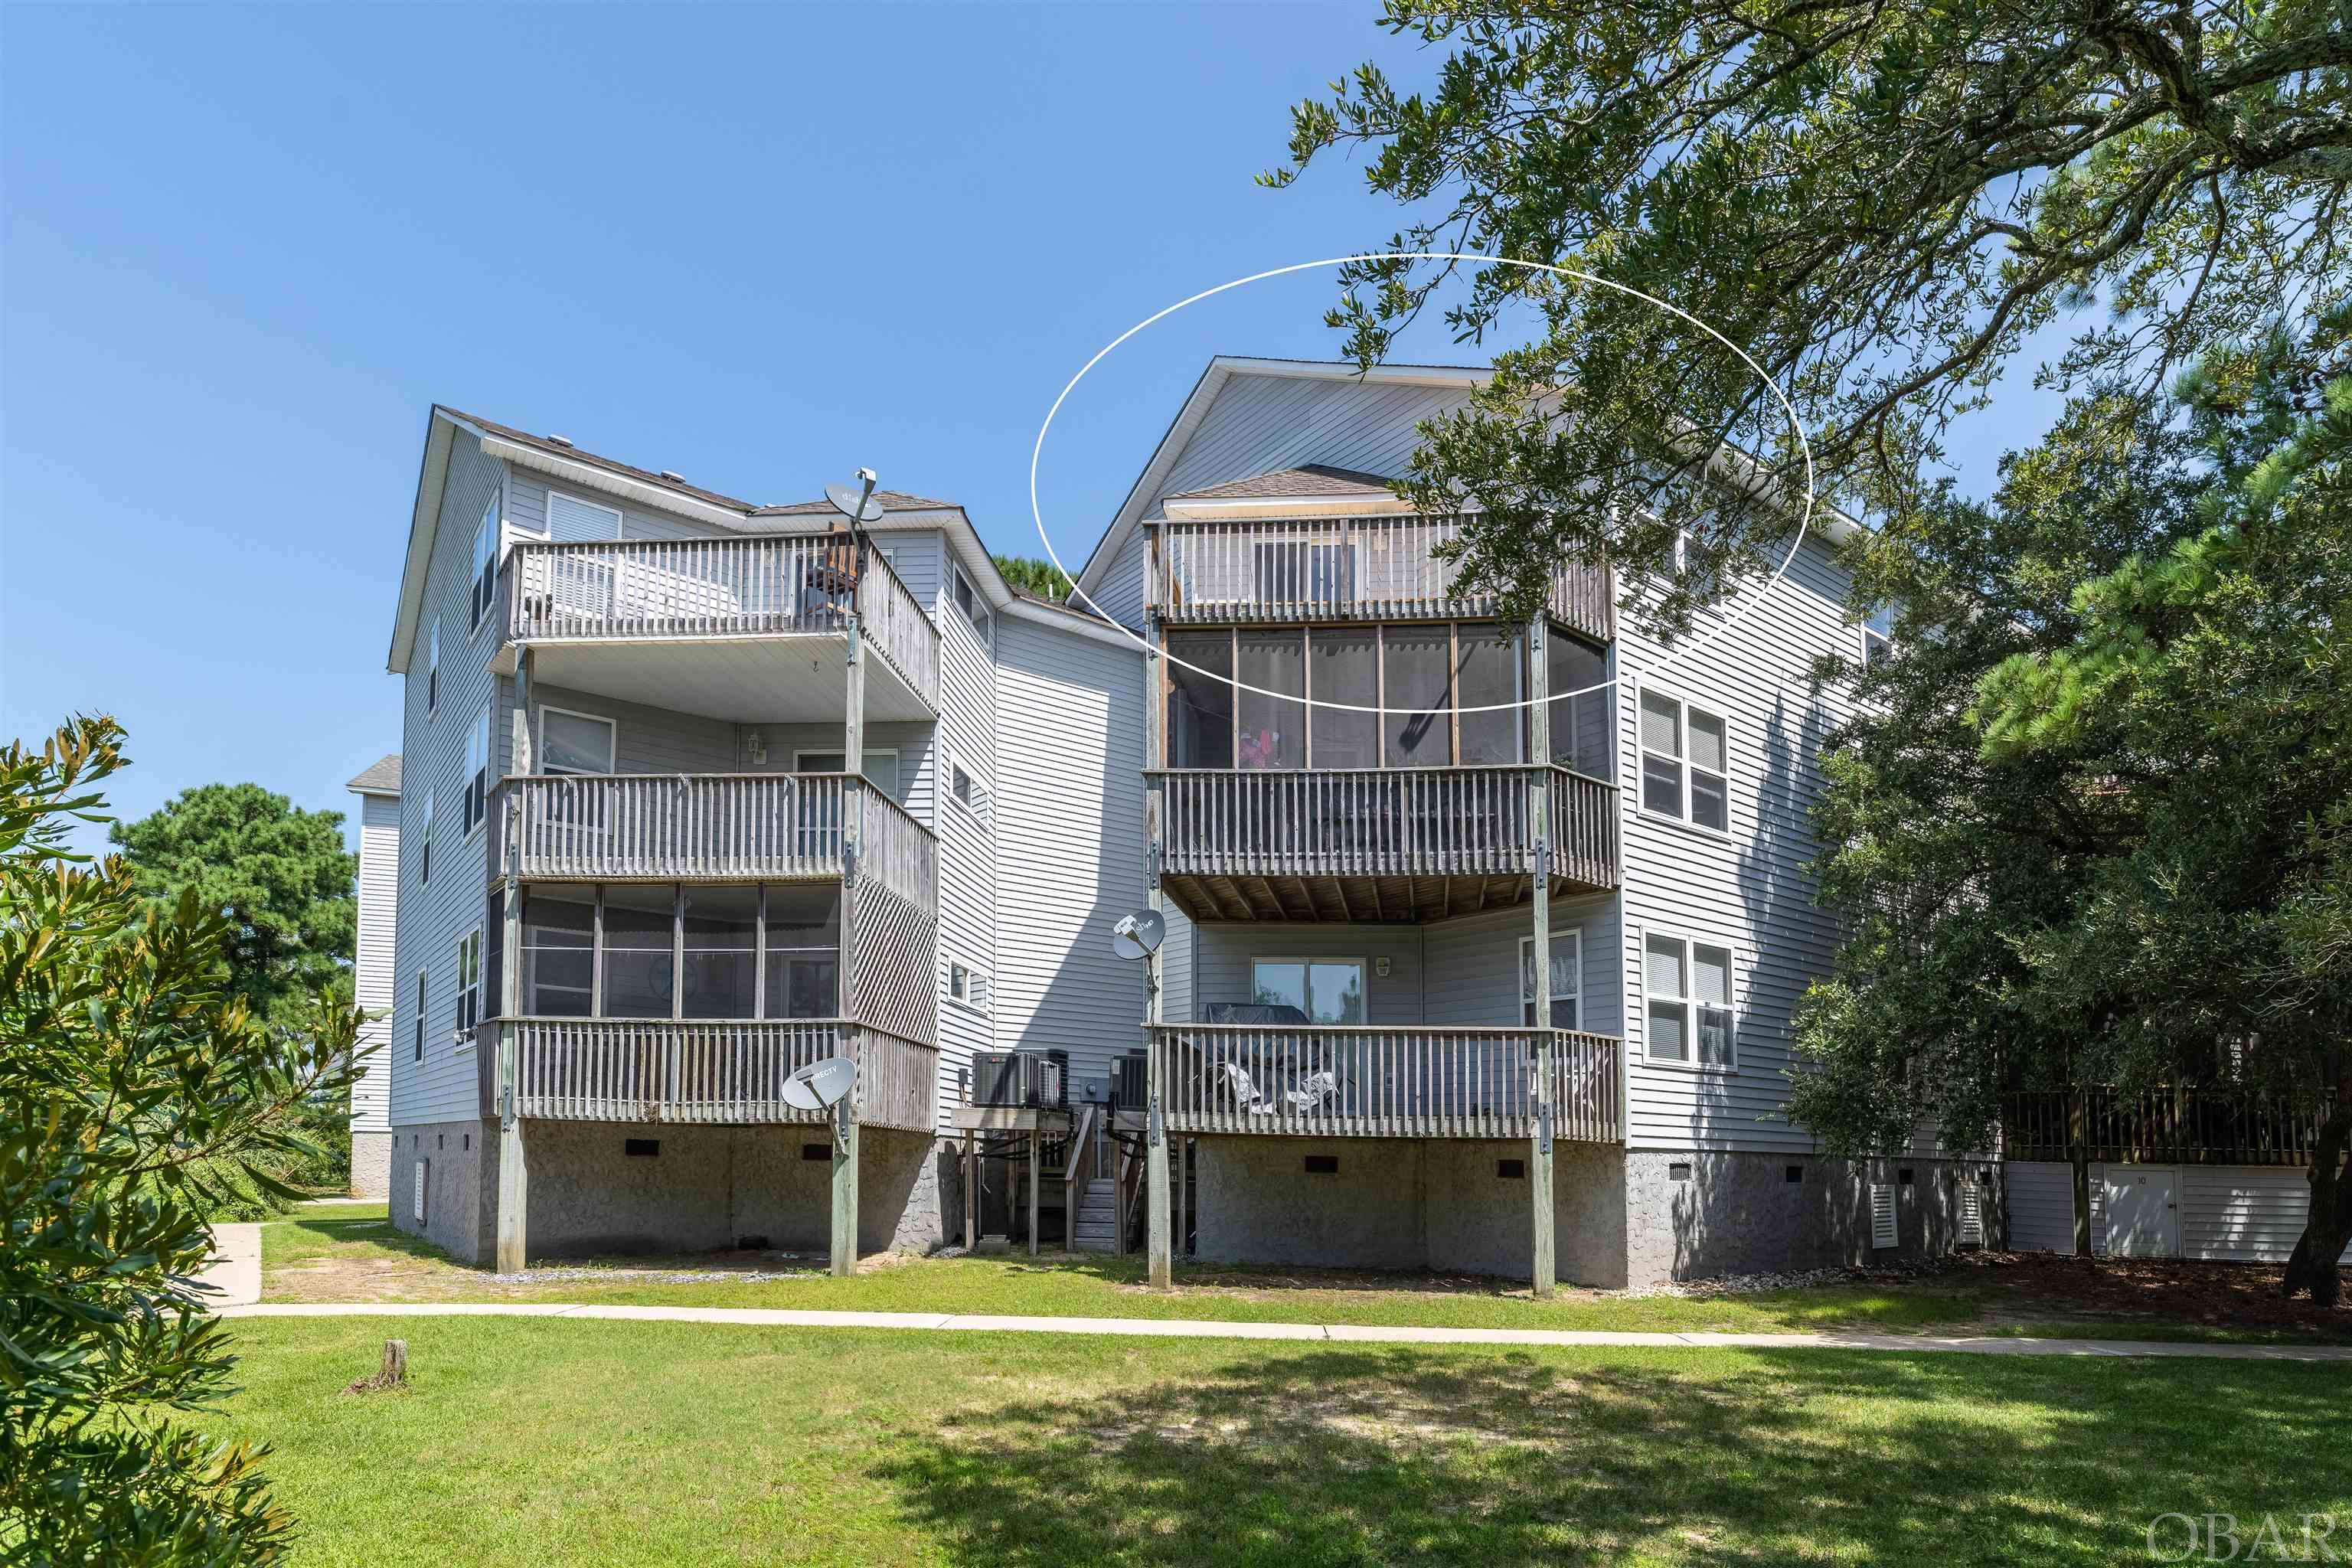 700 First Street, Kill Devil Hills, NC 27948, 2 Bedrooms Bedrooms, ,2 BathroomsBathrooms,Residential,For sale,First Street,115909